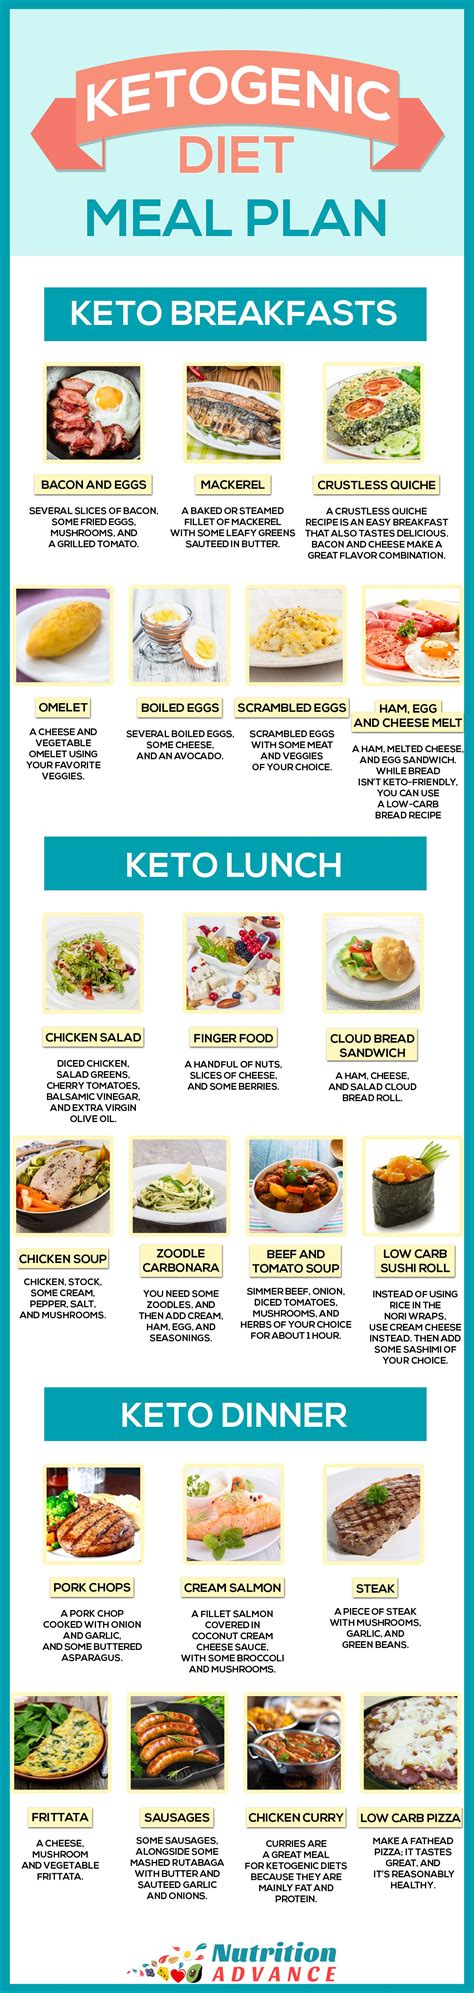 Ketogenic Diet Meal Plan For 7 Days - This infographic shows some ideas for a keto breakfast ...